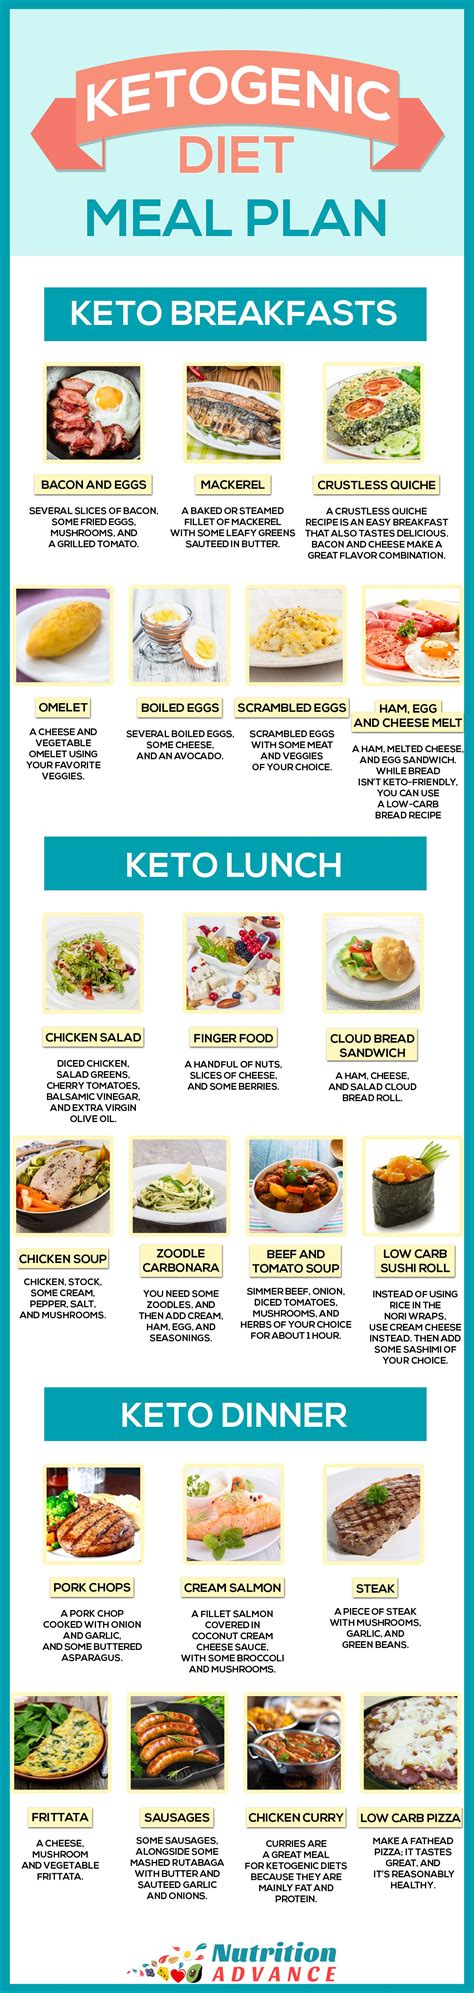 Ketogenic Diet Meal Plan For 7 Days - This infographic shows some ideas for a keto breakfast ...